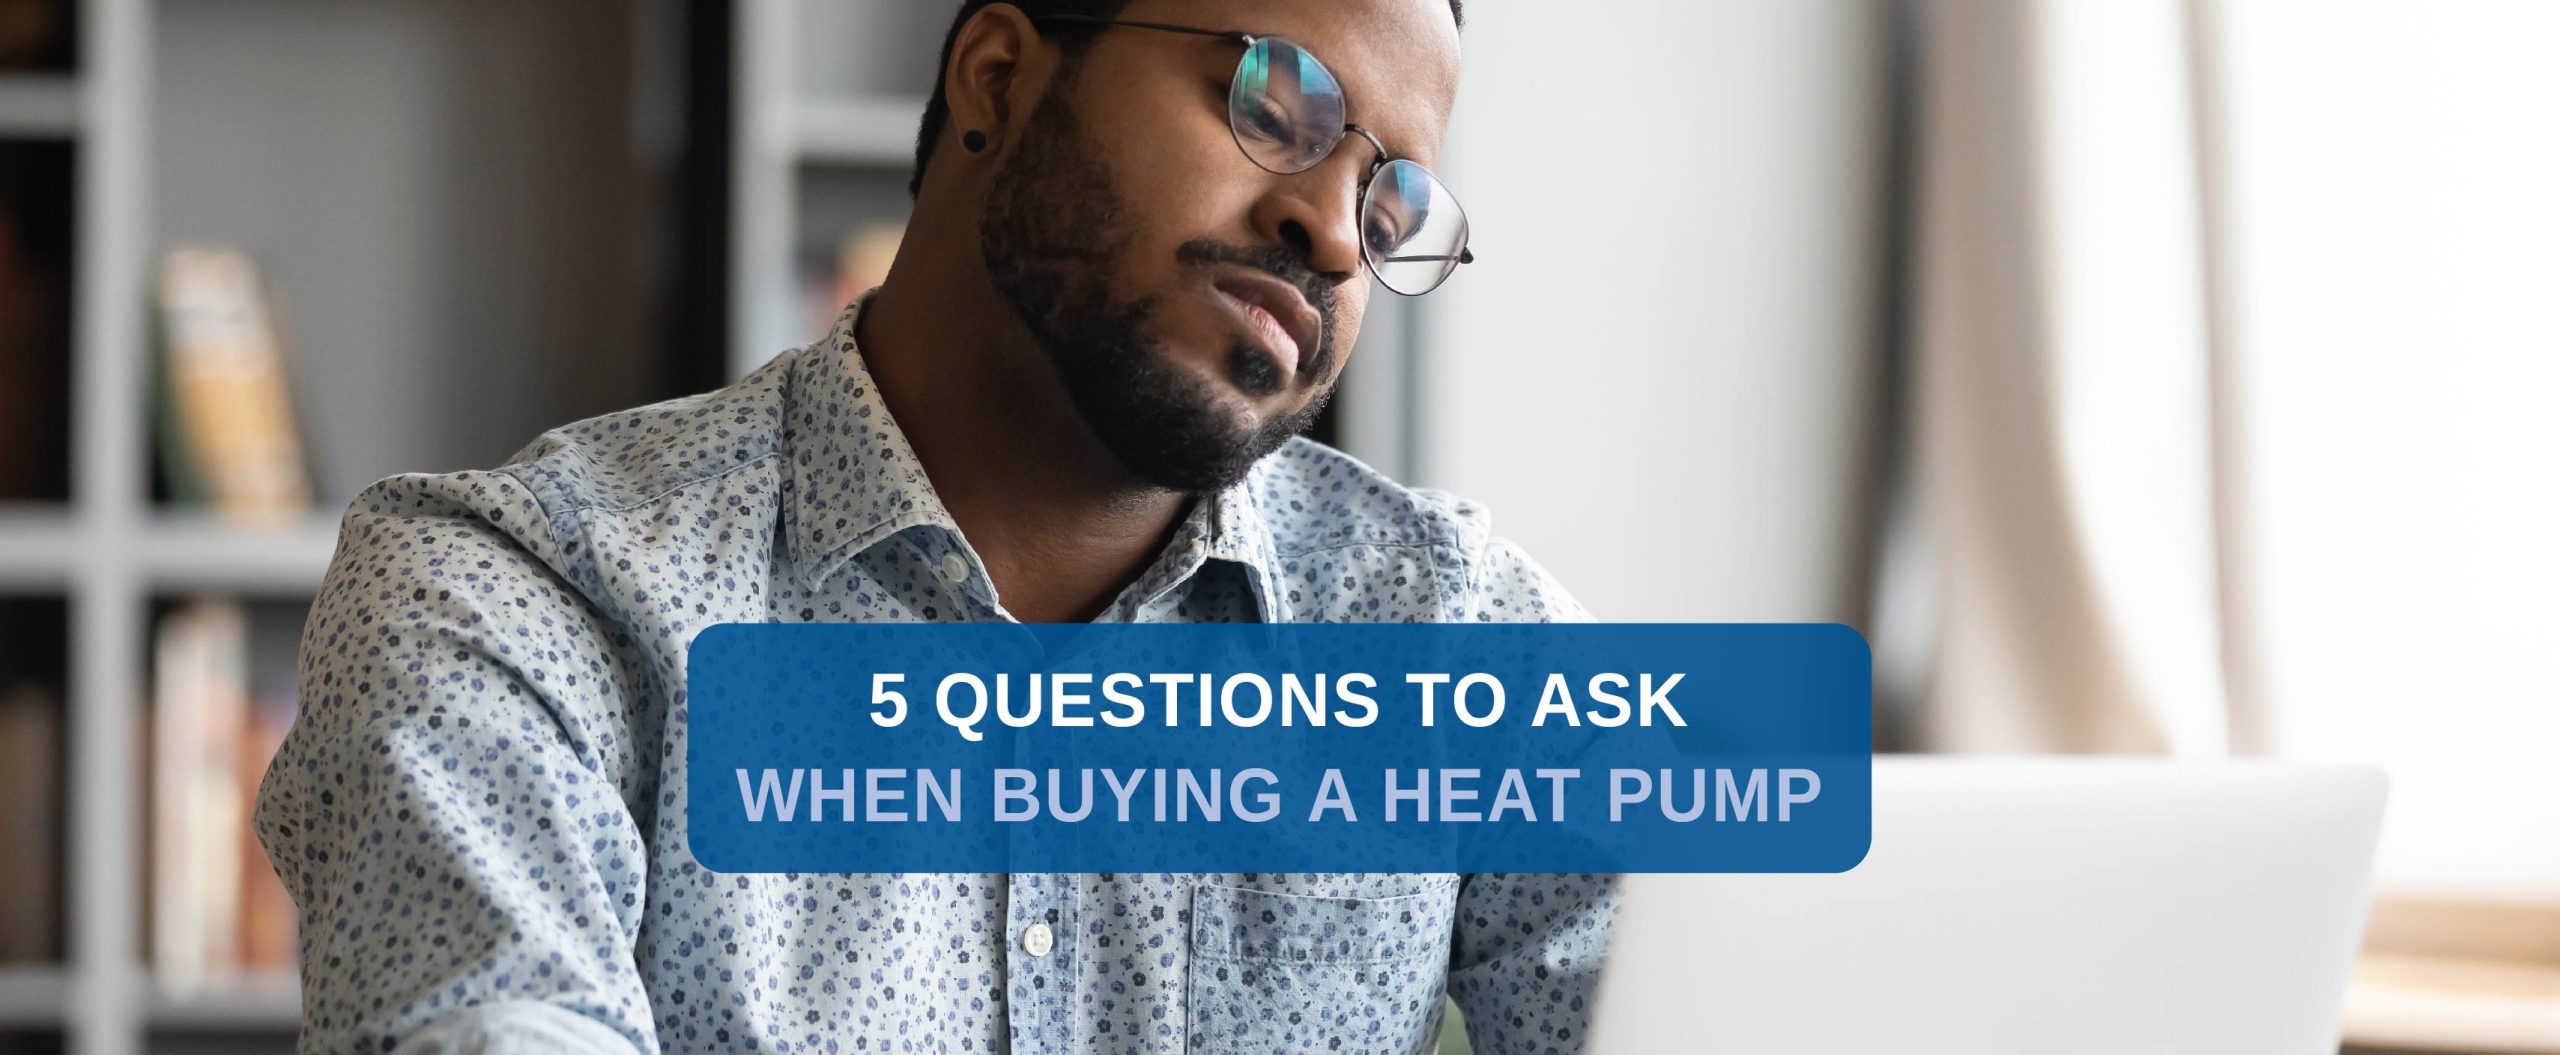 man thinking about buying a heat pump